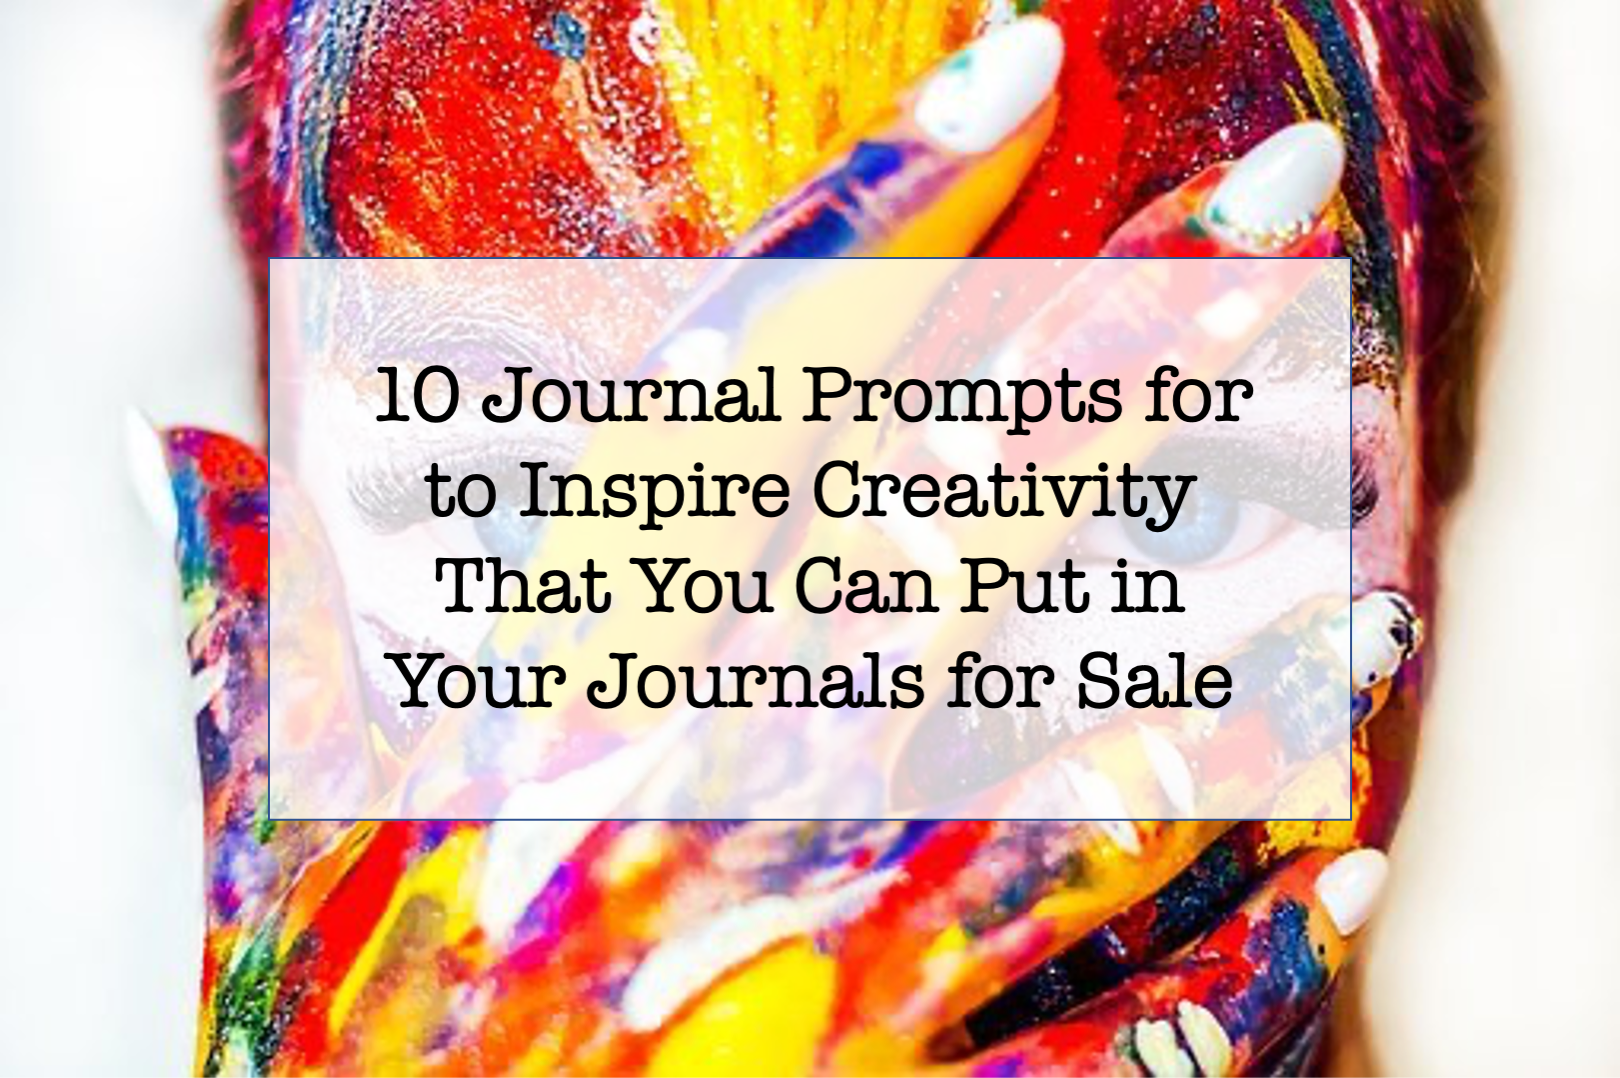 Creativity Journal Prompts To Encourage Creative Thinking For Your Journals And Journaling